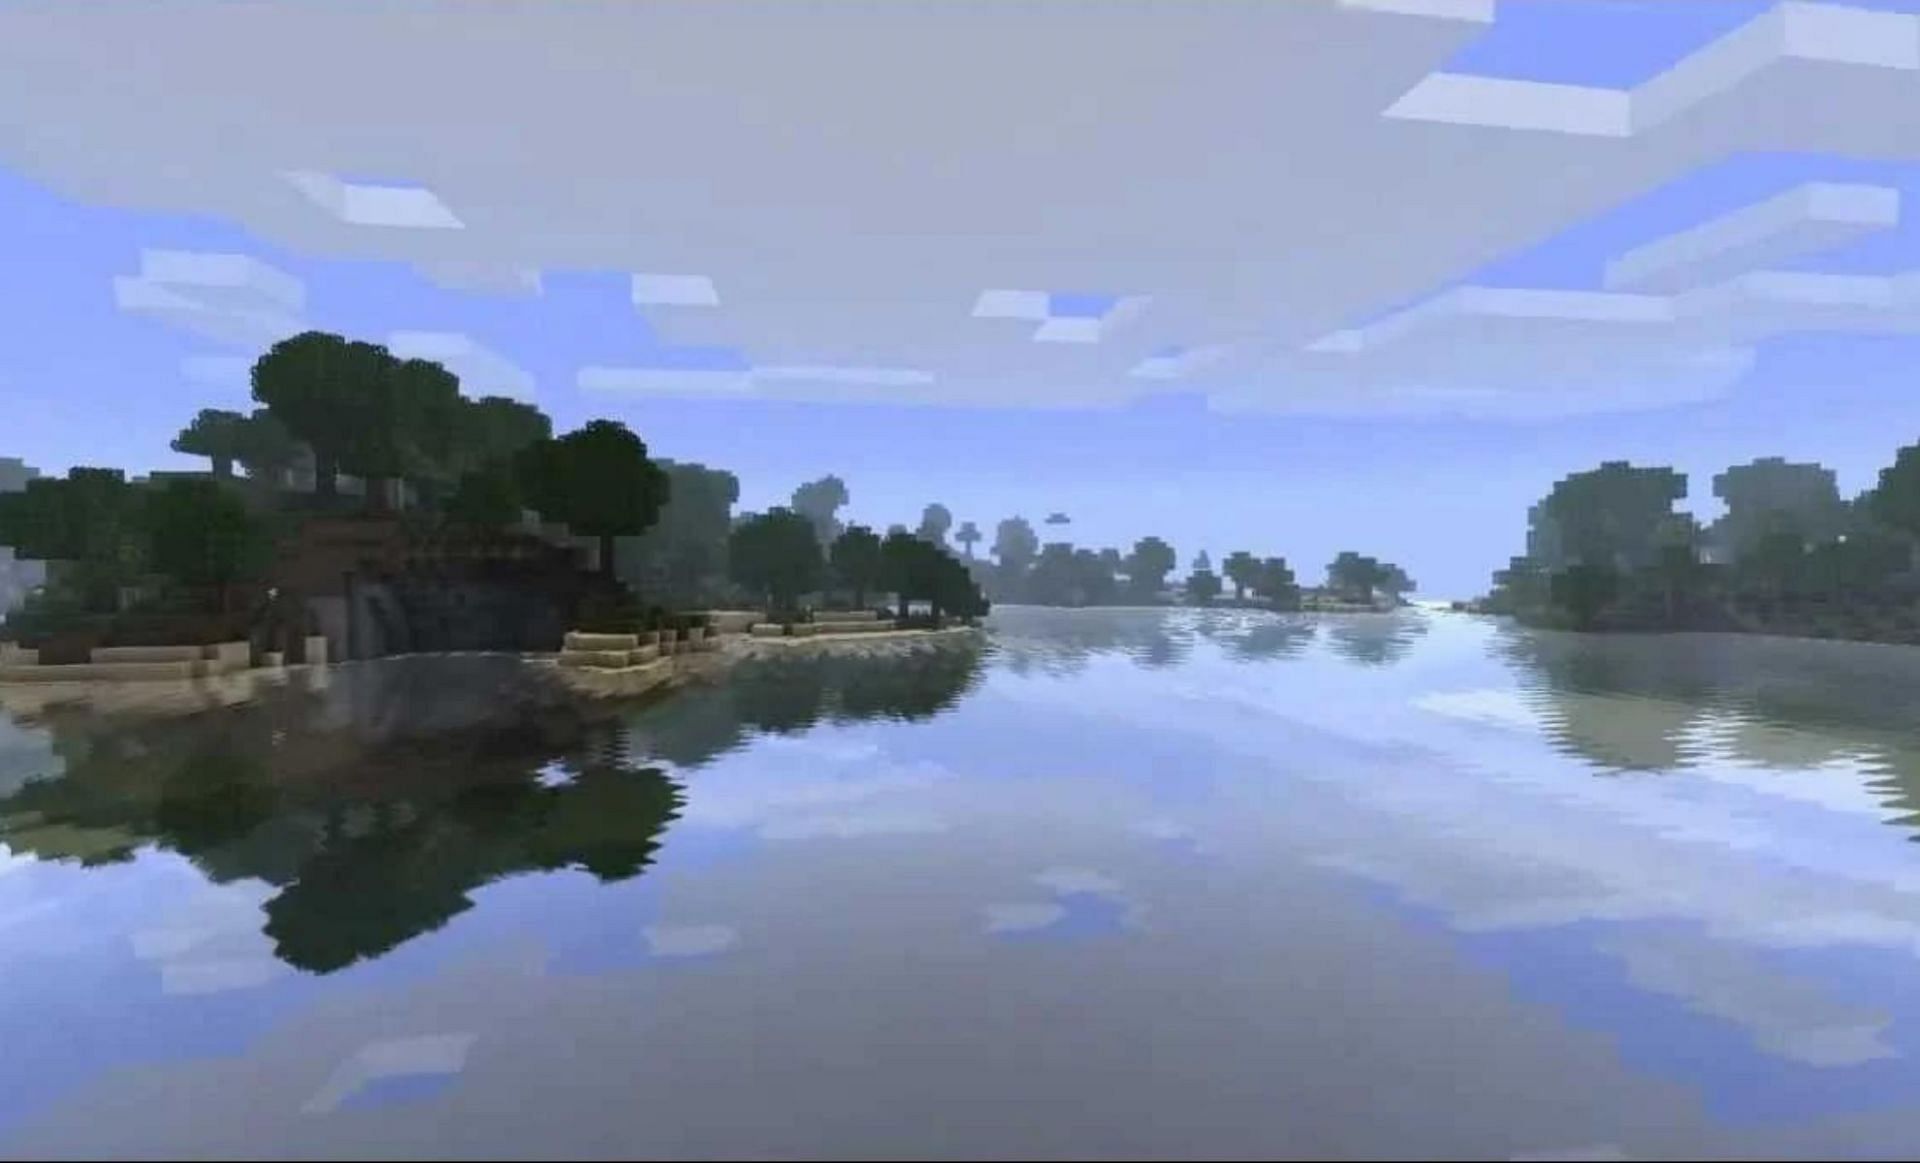 Texture packs can make Minecraft more realistic (Image via Minecraft Forum)